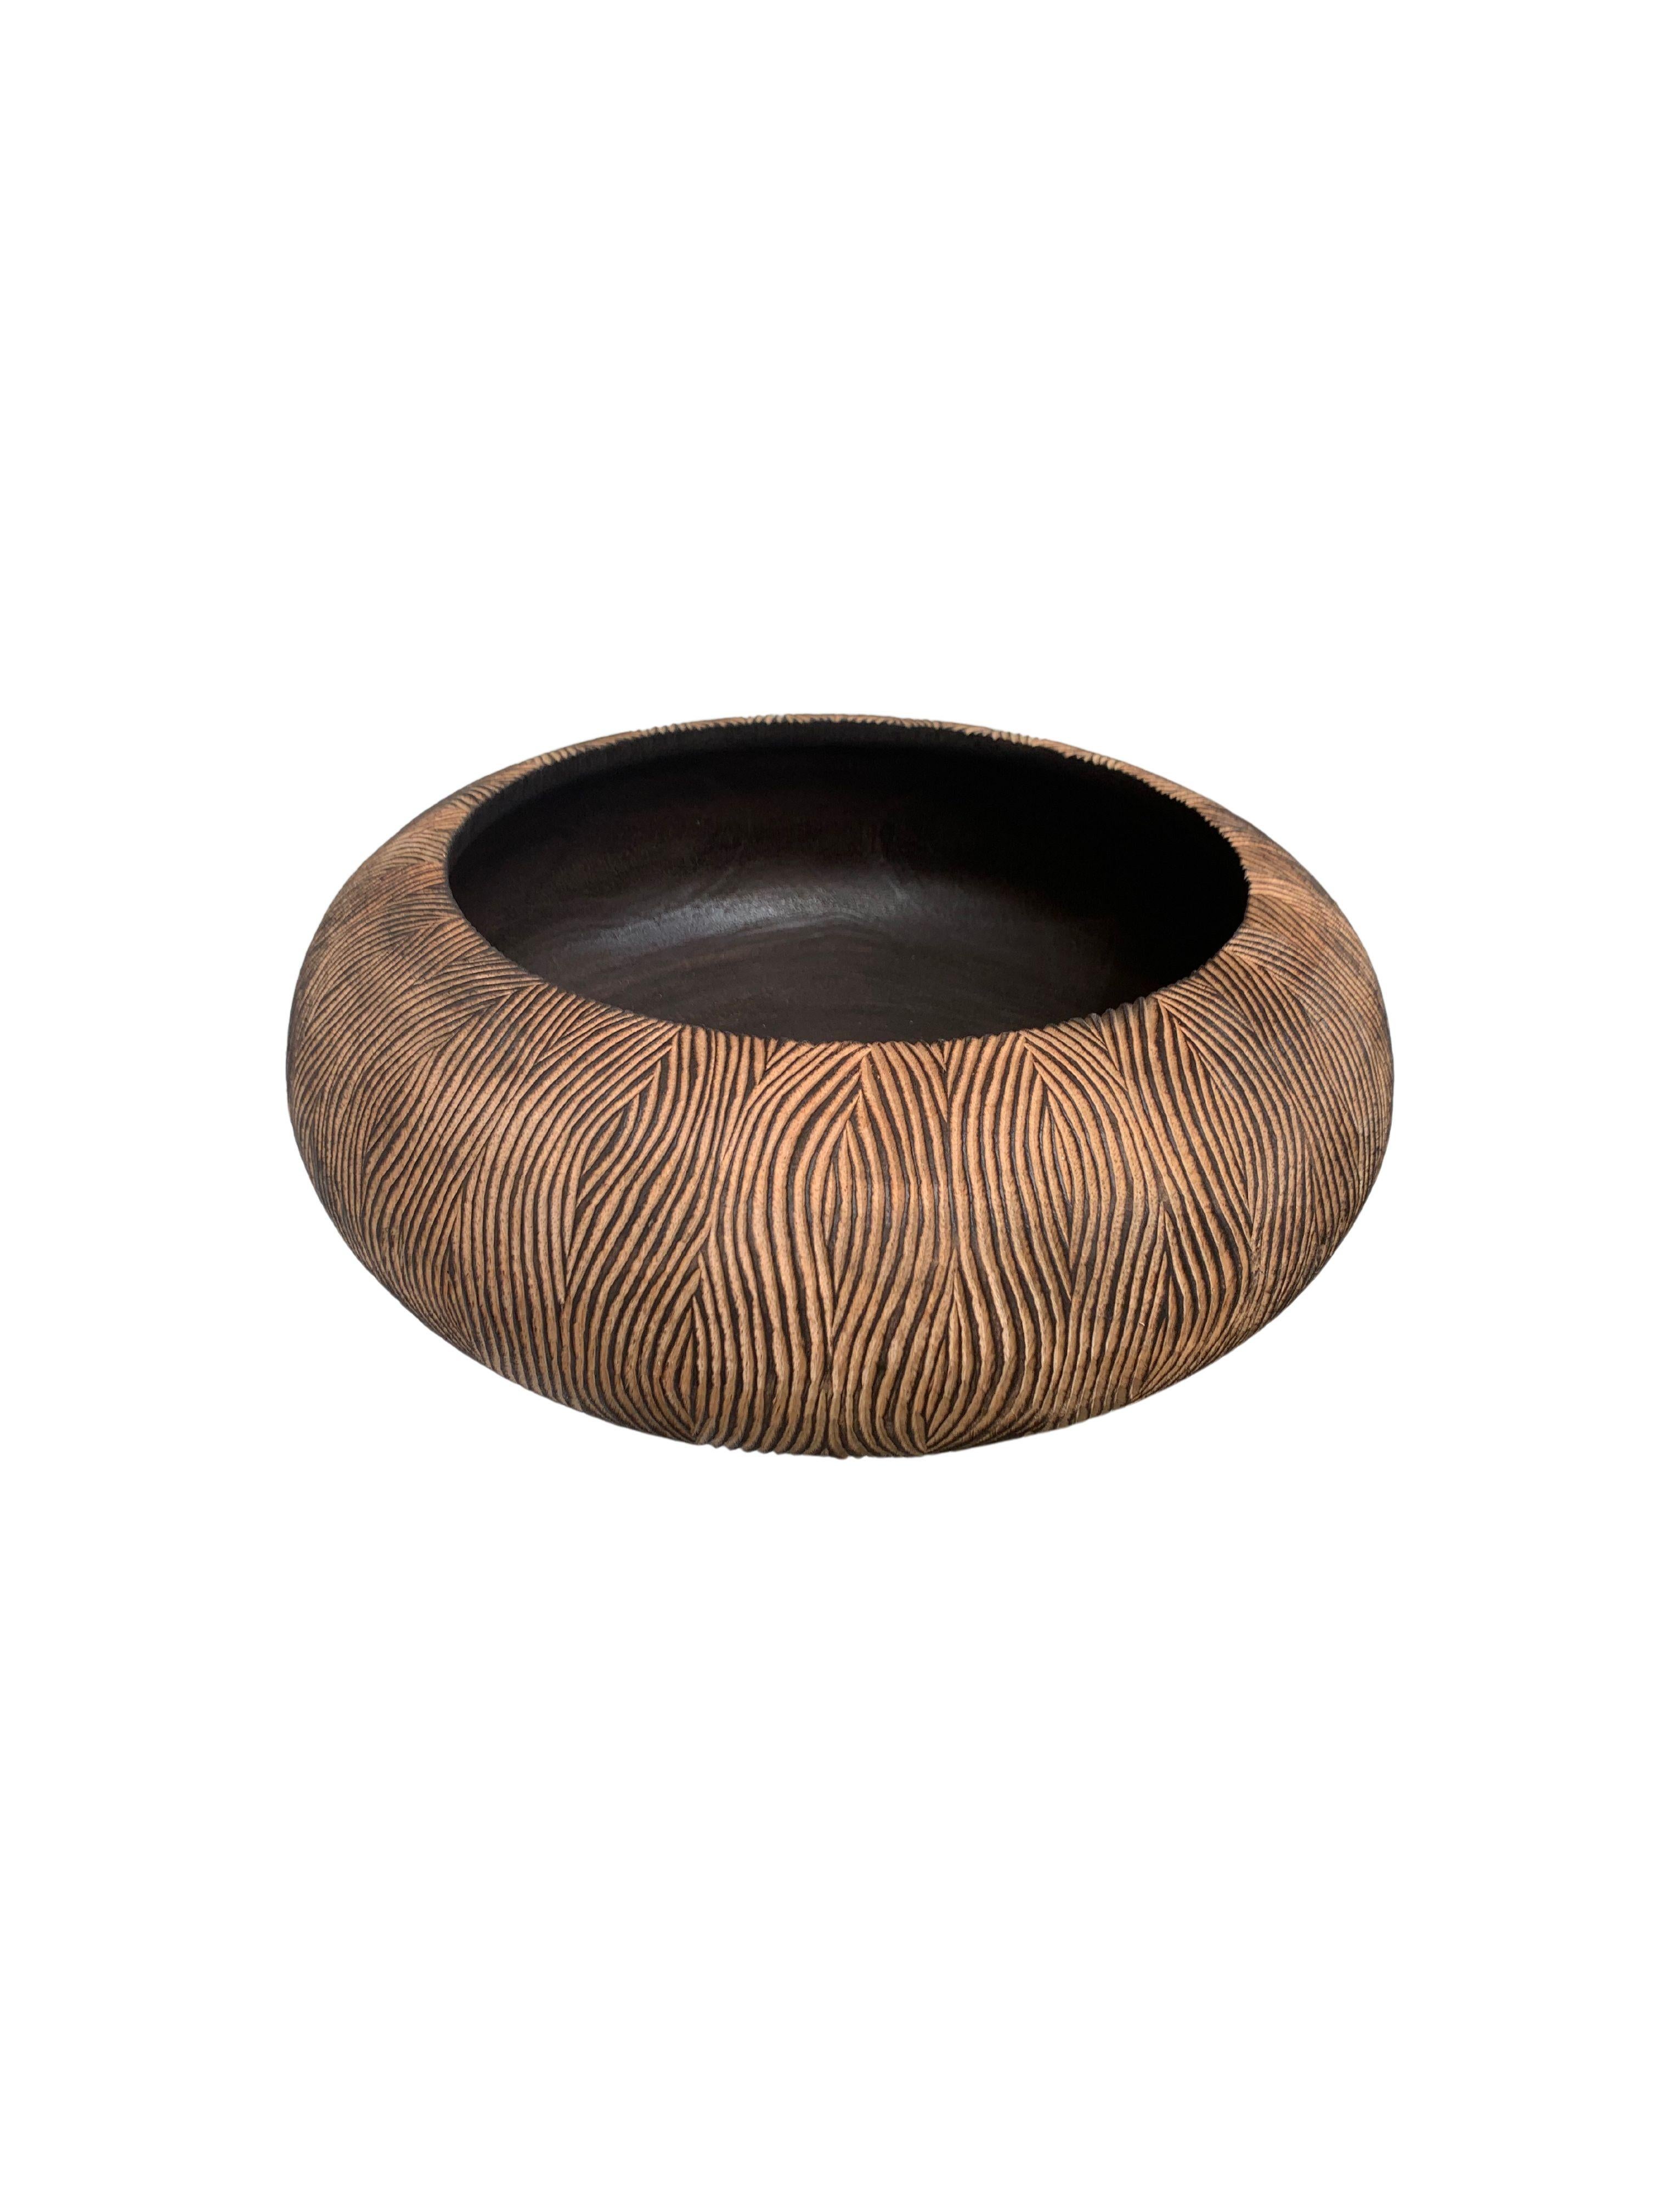 Solid Mango Wood Bowl with Carved Exterior & Burnt Finish In Good Condition For Sale In Jimbaran, Bali